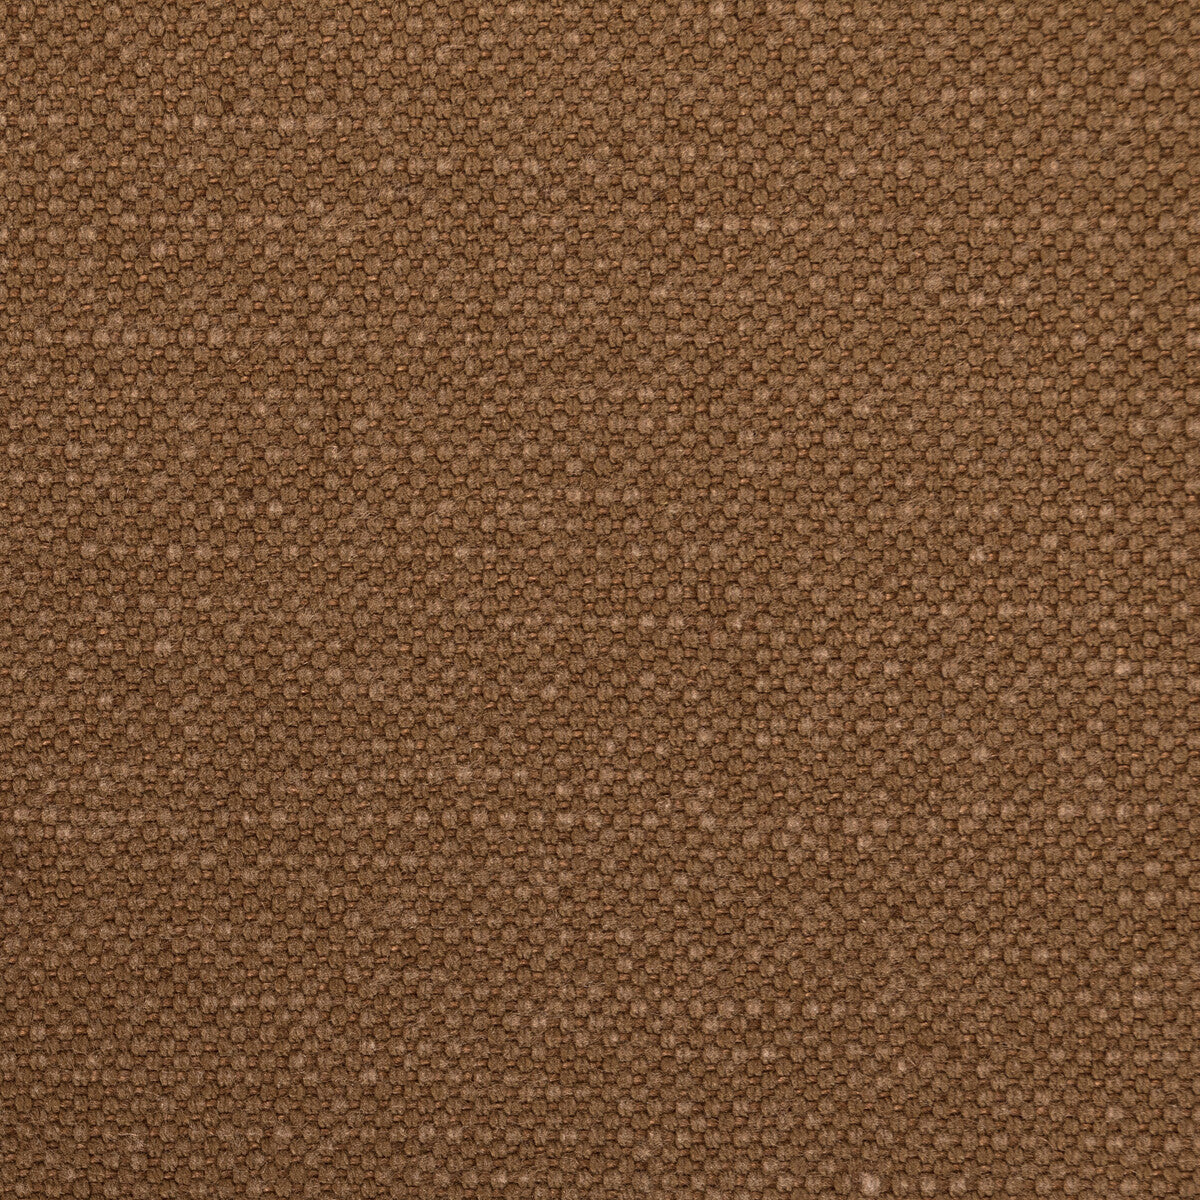 Carson fabric in chocolate color - pattern 36282.6.0 - by Kravet Basics